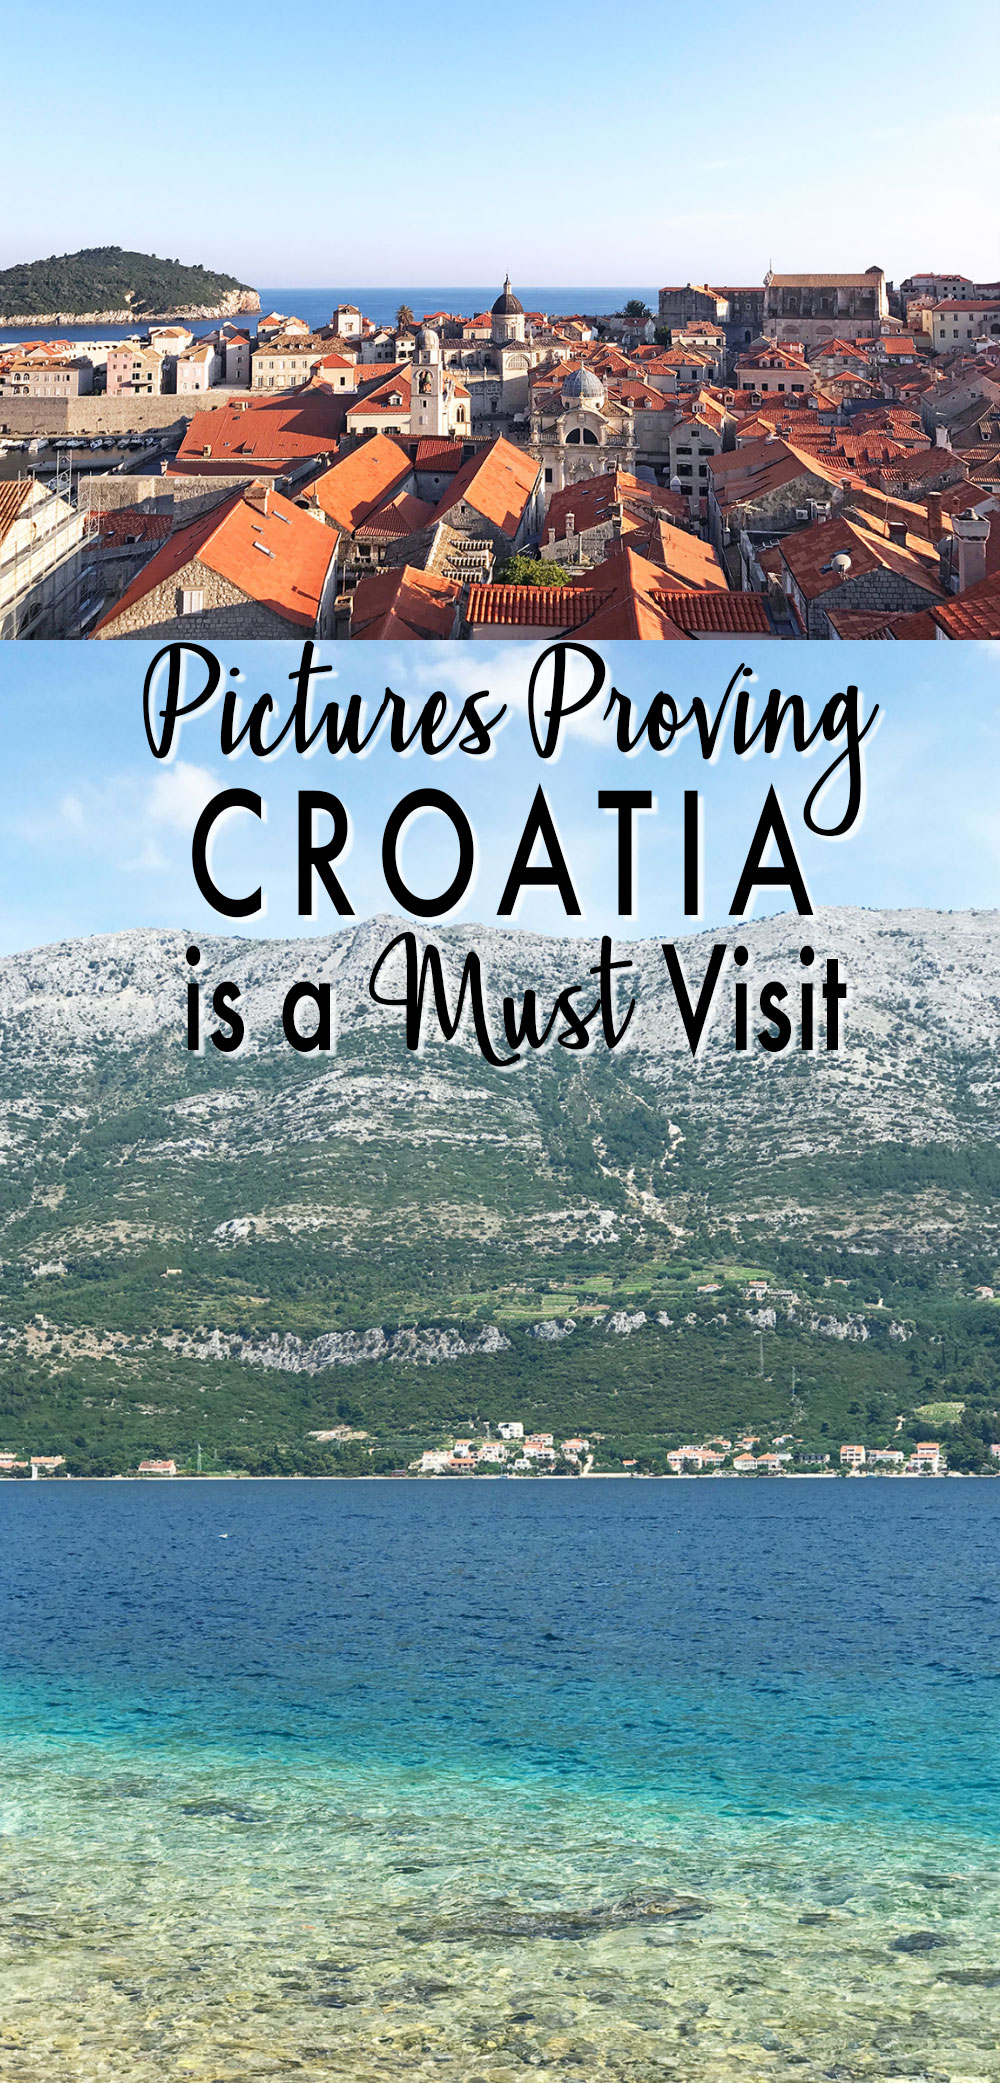 Pictures-Proving-You-Must-Travel-Croatia.jpg